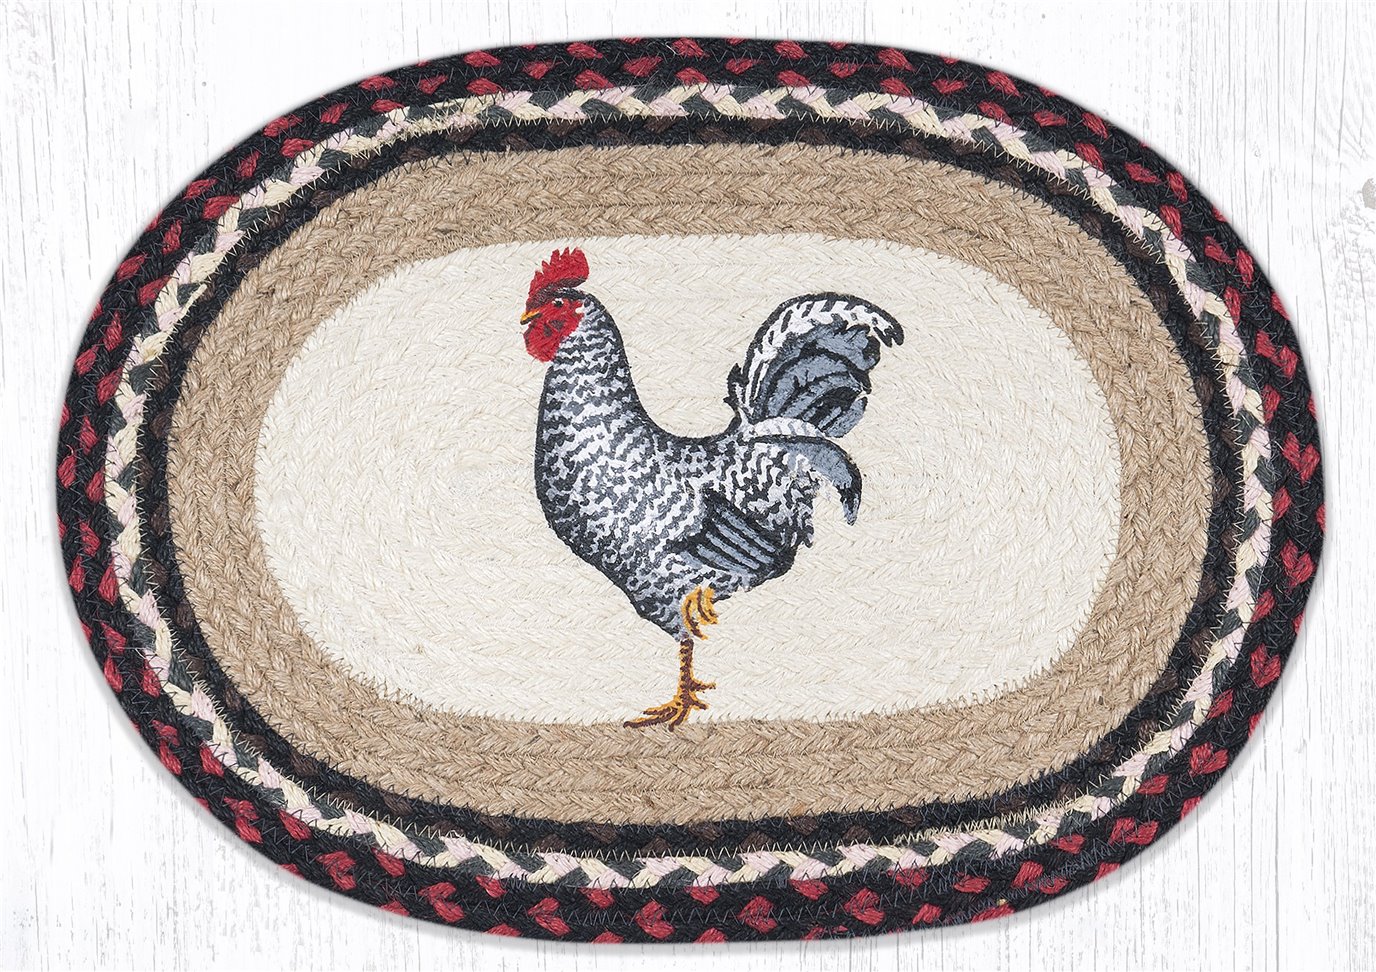 Black & White Rooster Oval Braided Placemat 13"x19"